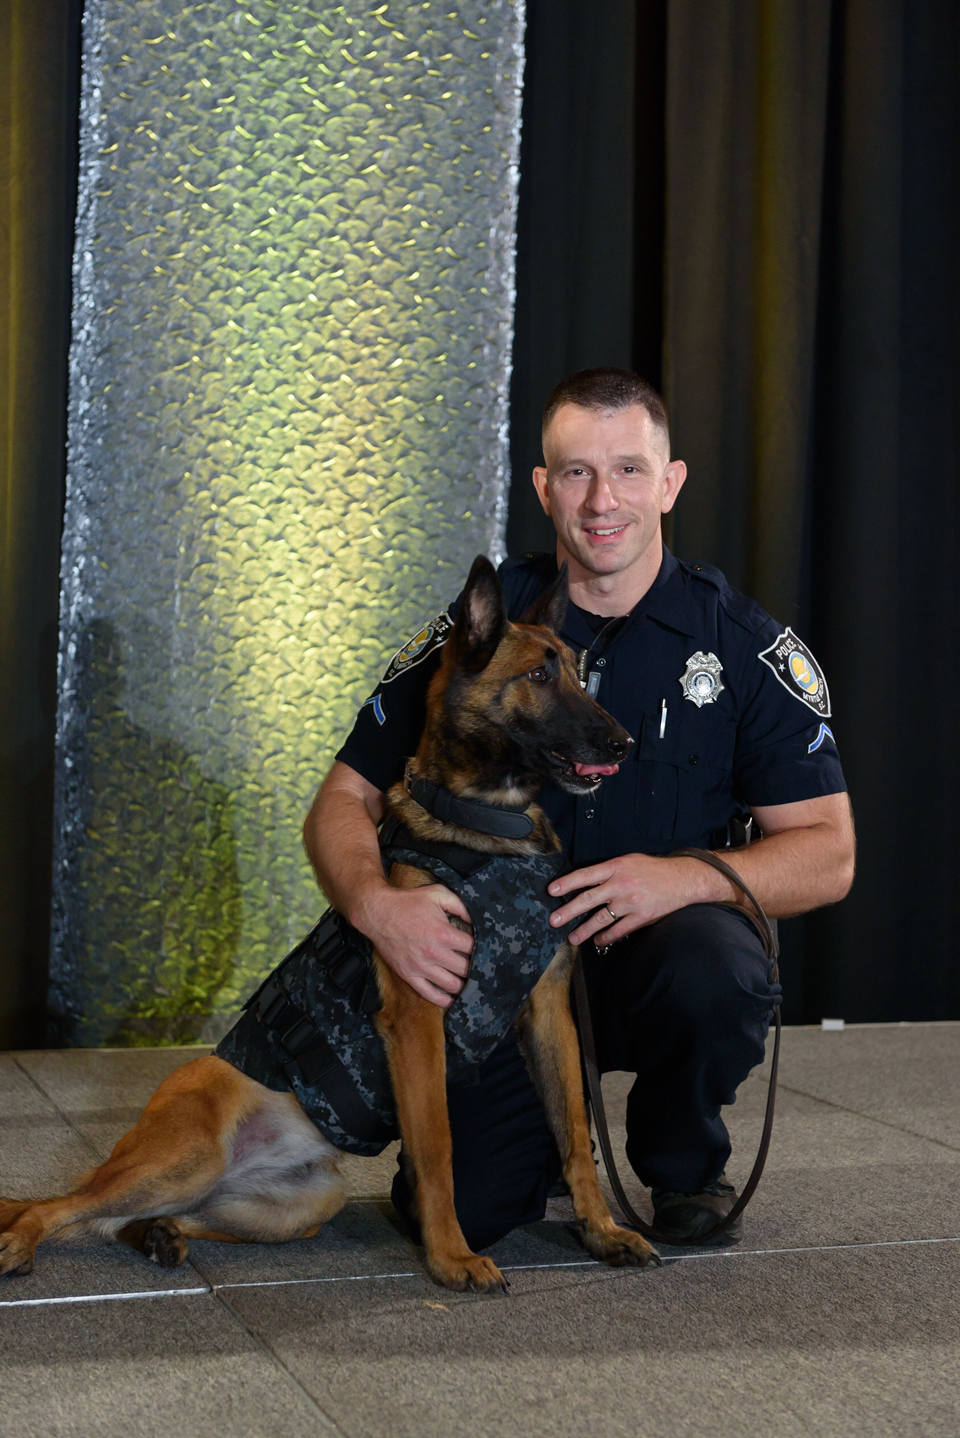 k-9 unit and his dog pose during awards at the blogpaws conference